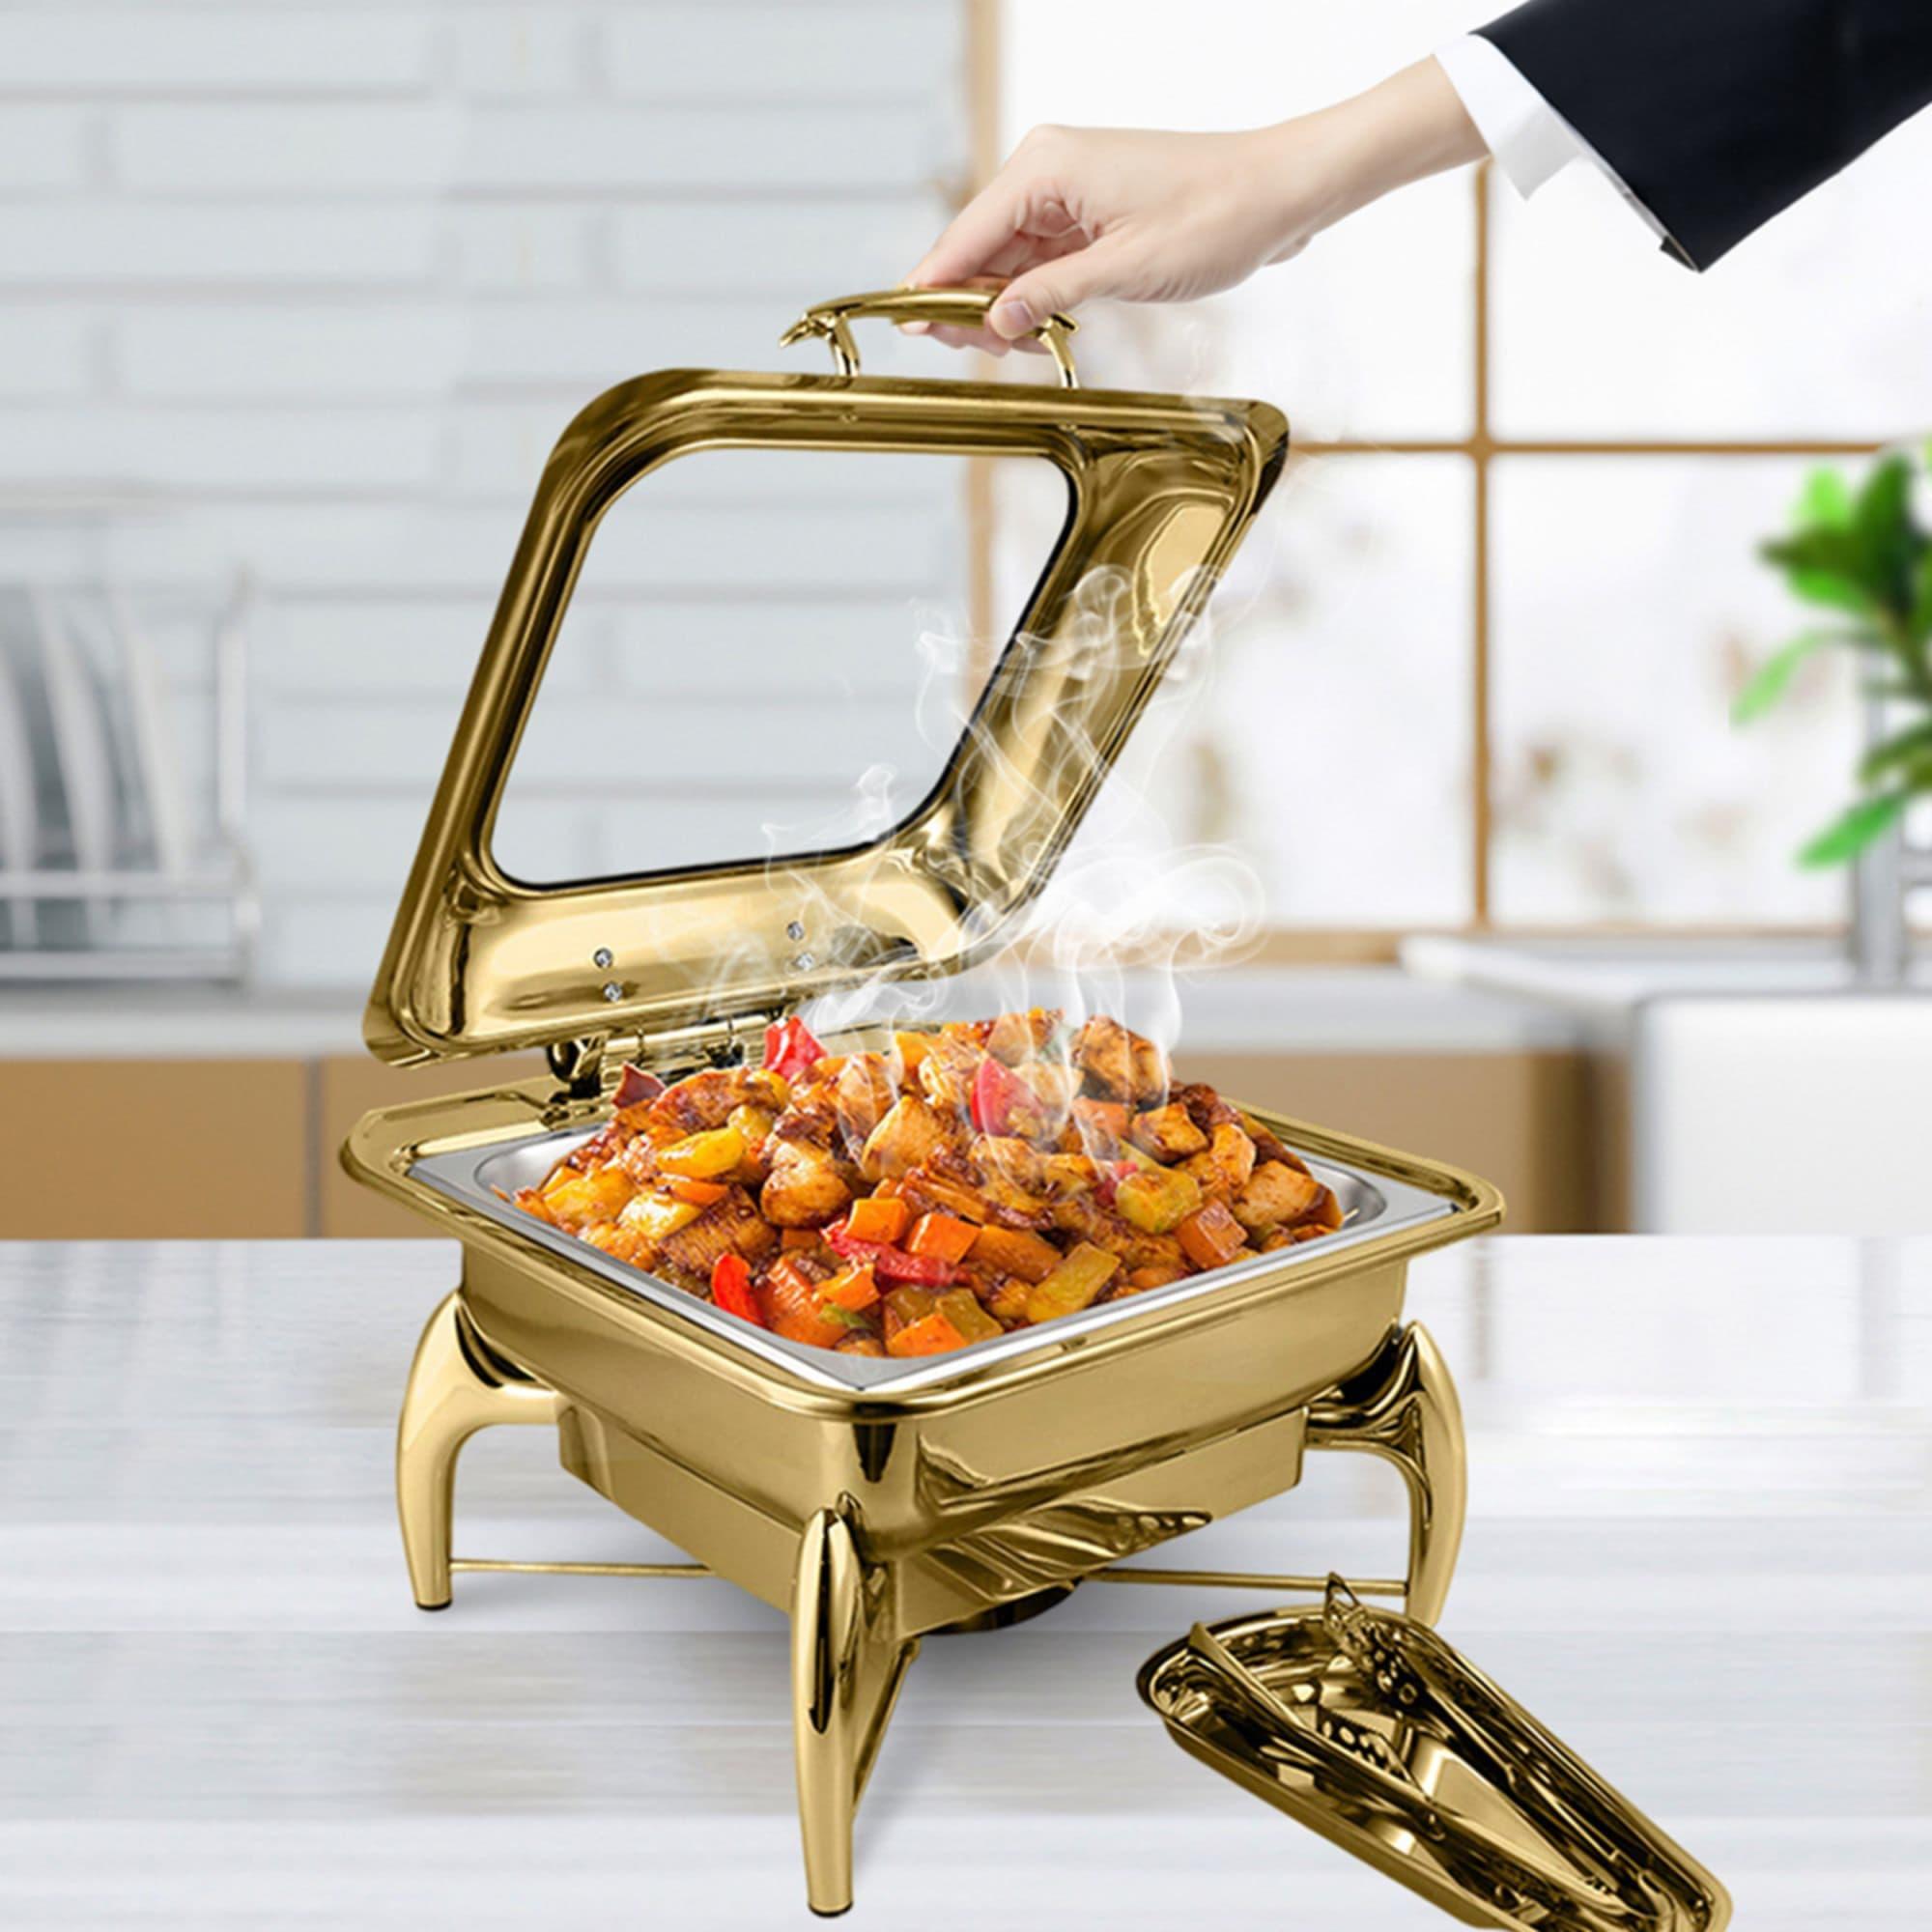 Soga Square Stainless Steel Chafing Dish with Top Lid Set of 2 Gold Image 4